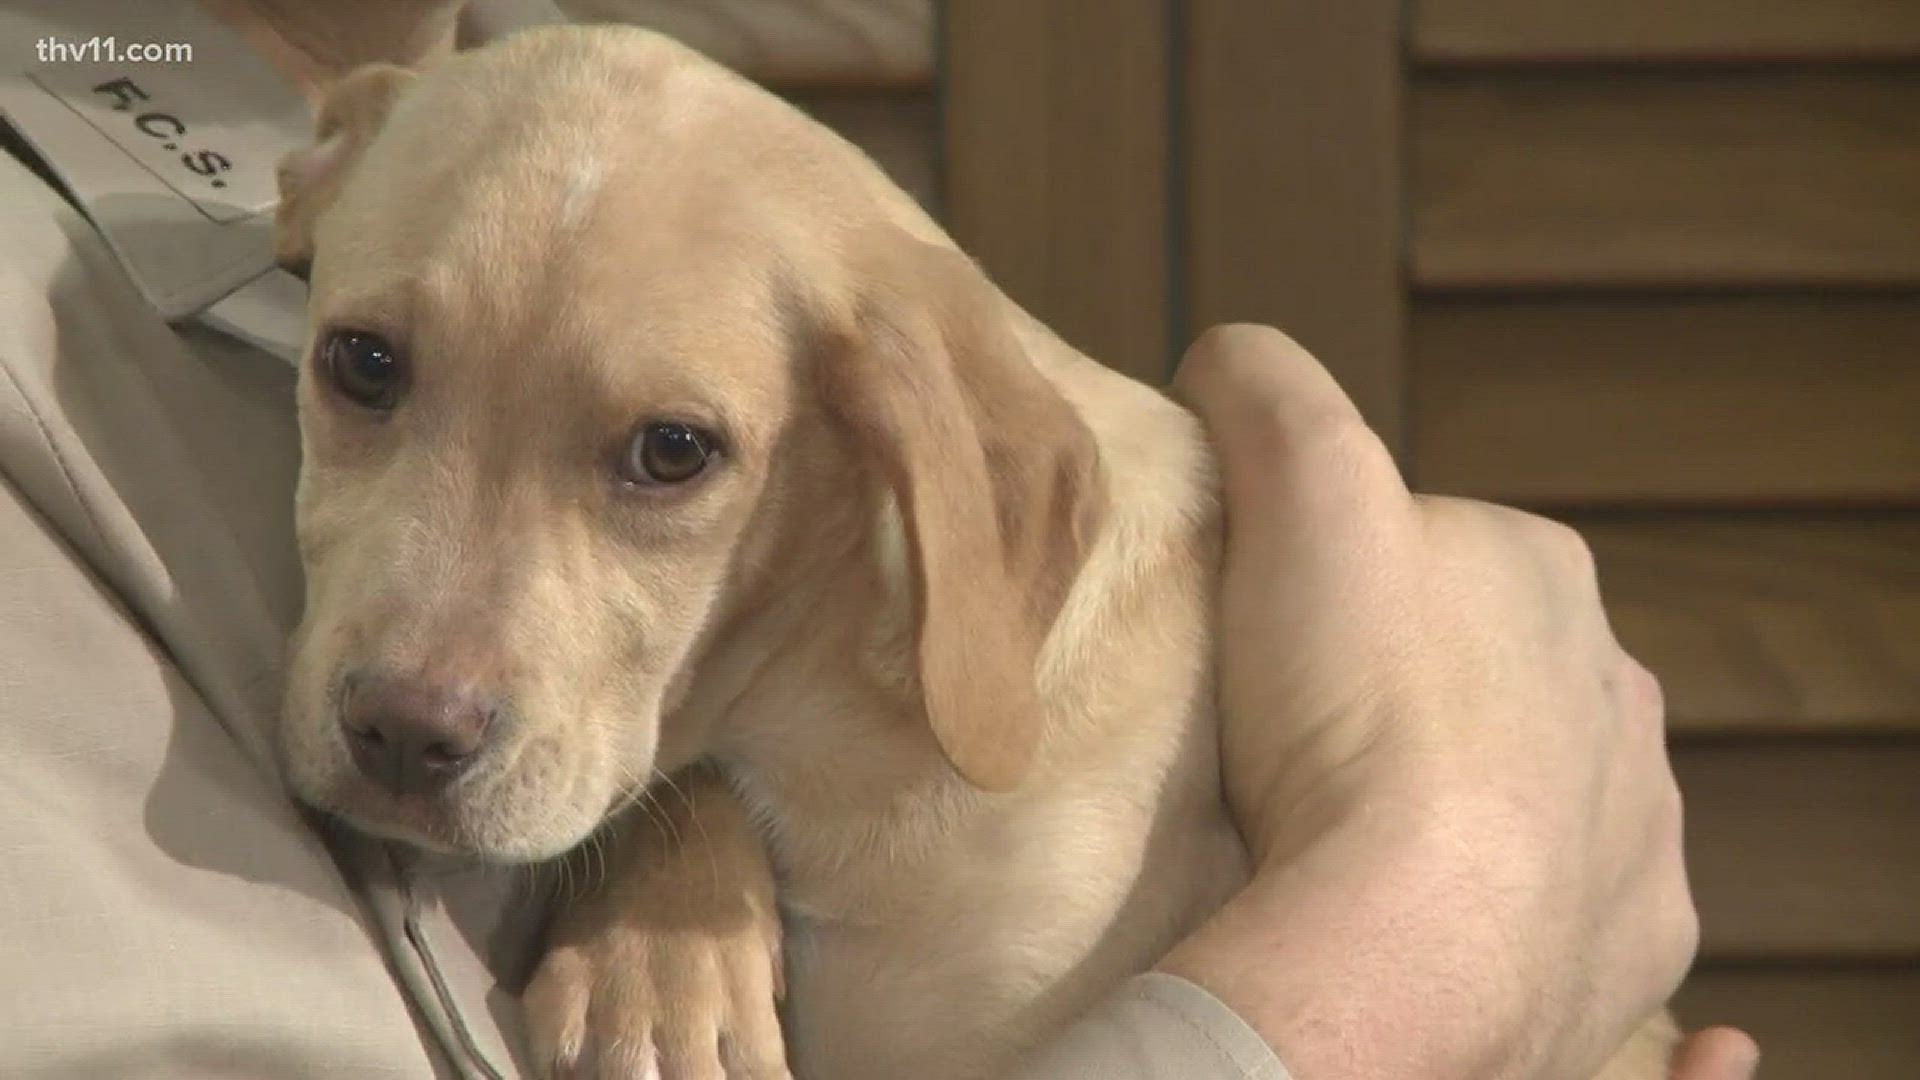 Paul Hughes with Friends of the Animal Village visited THV11 This Morning with a sweet puppy named Bo